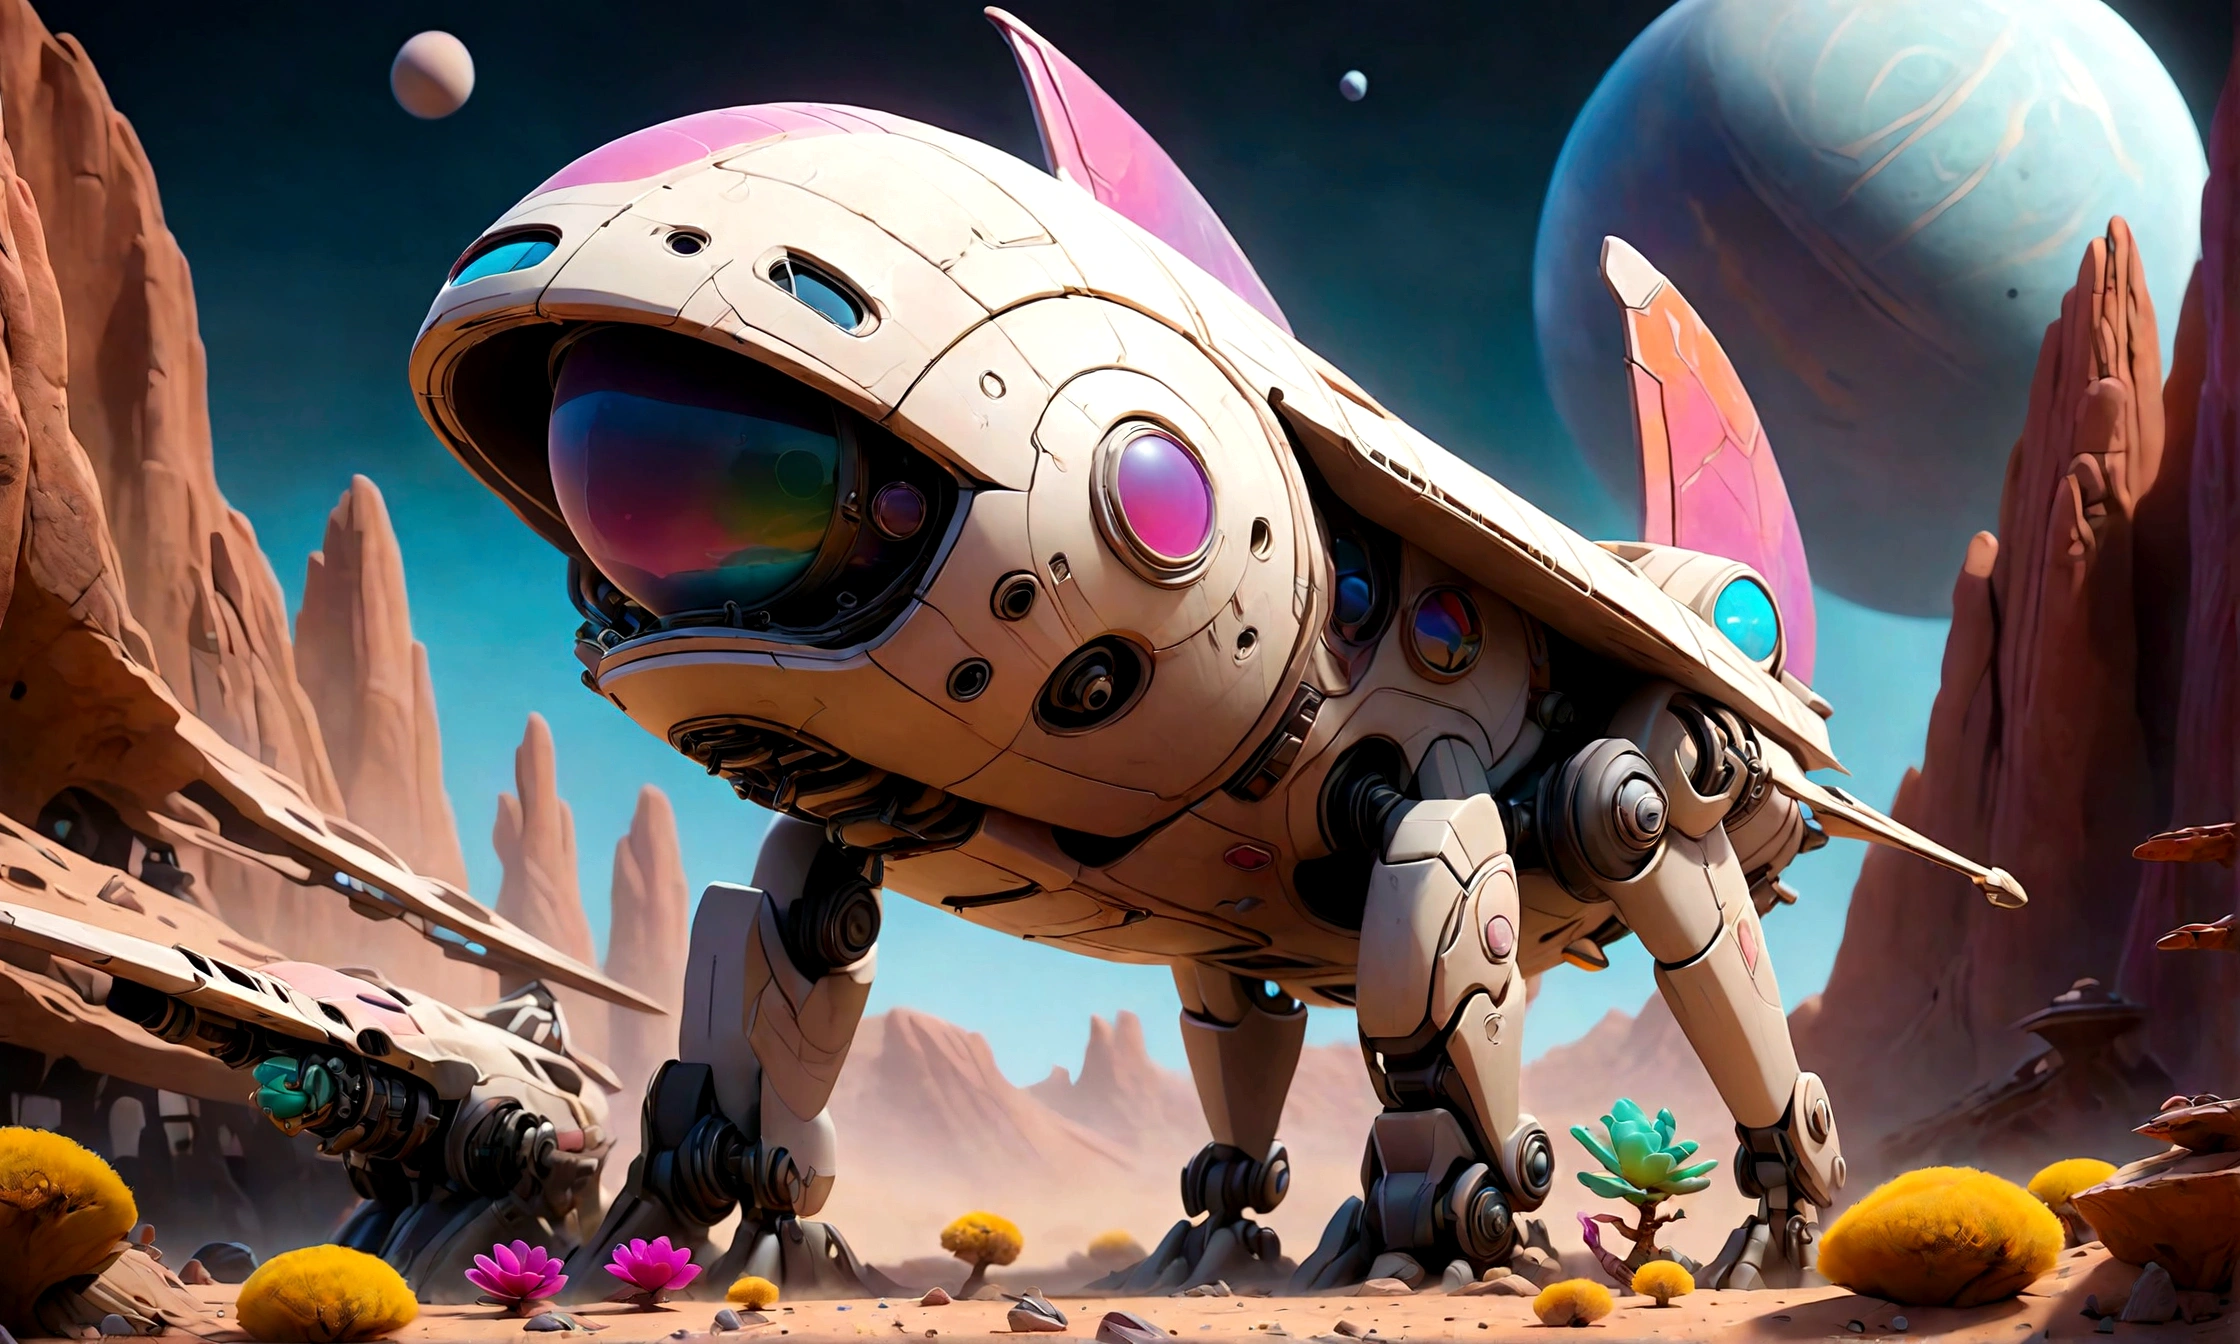 A damaged spaceship landed on an alien planet with exotic and colorful landscapes.